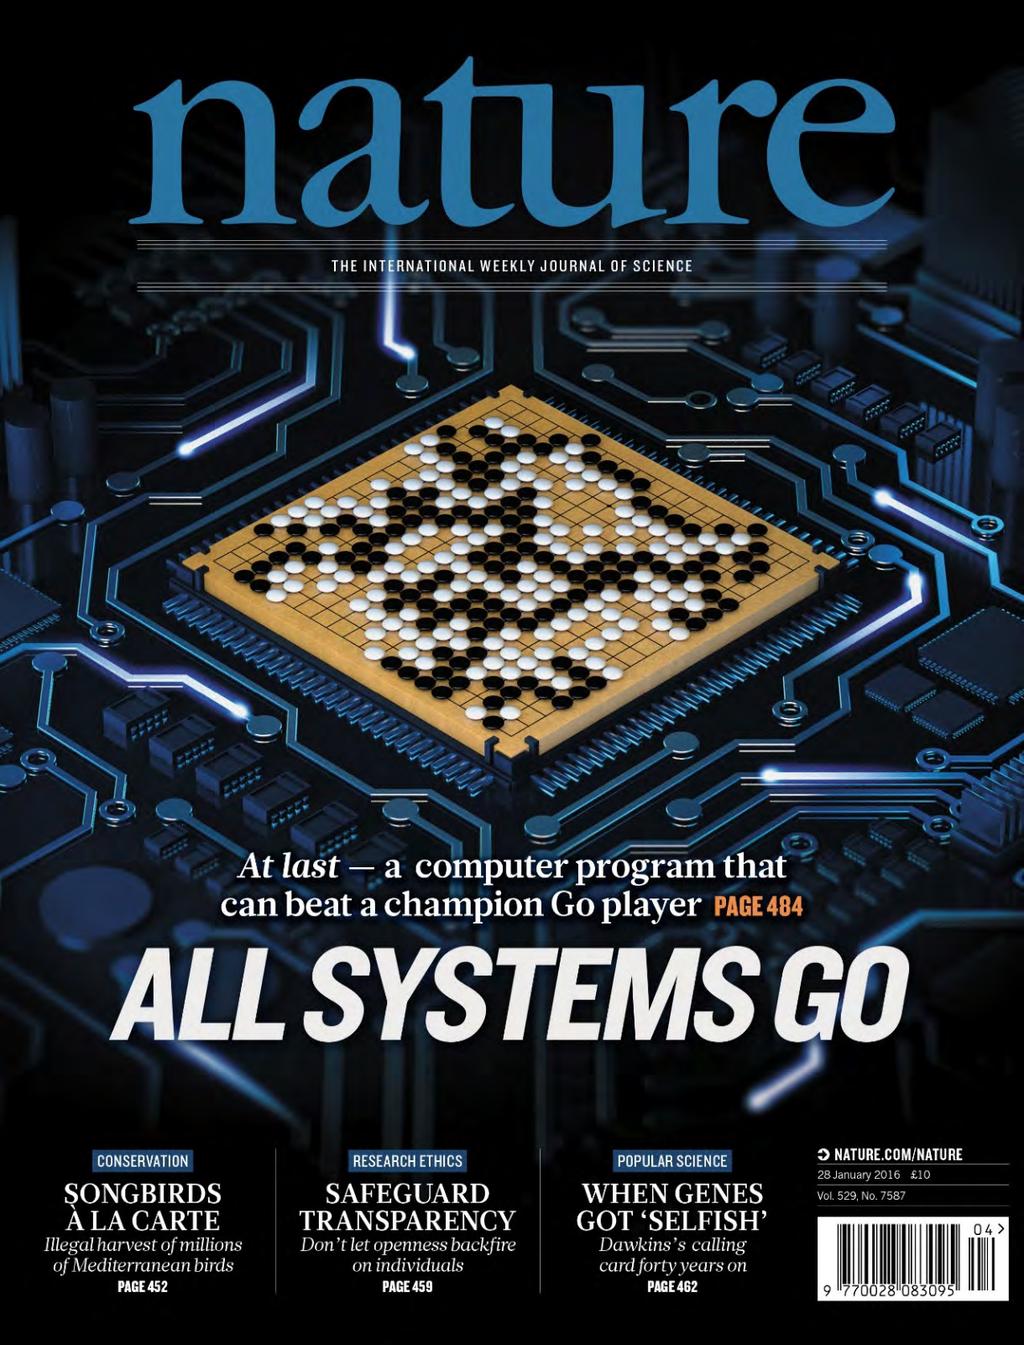 In Nature, 27 January 2016 DeepMind s program AlphaGo beat Fan Hui, the European Go champion, ﬁve Emes out of ﬁve in tournament condieons.